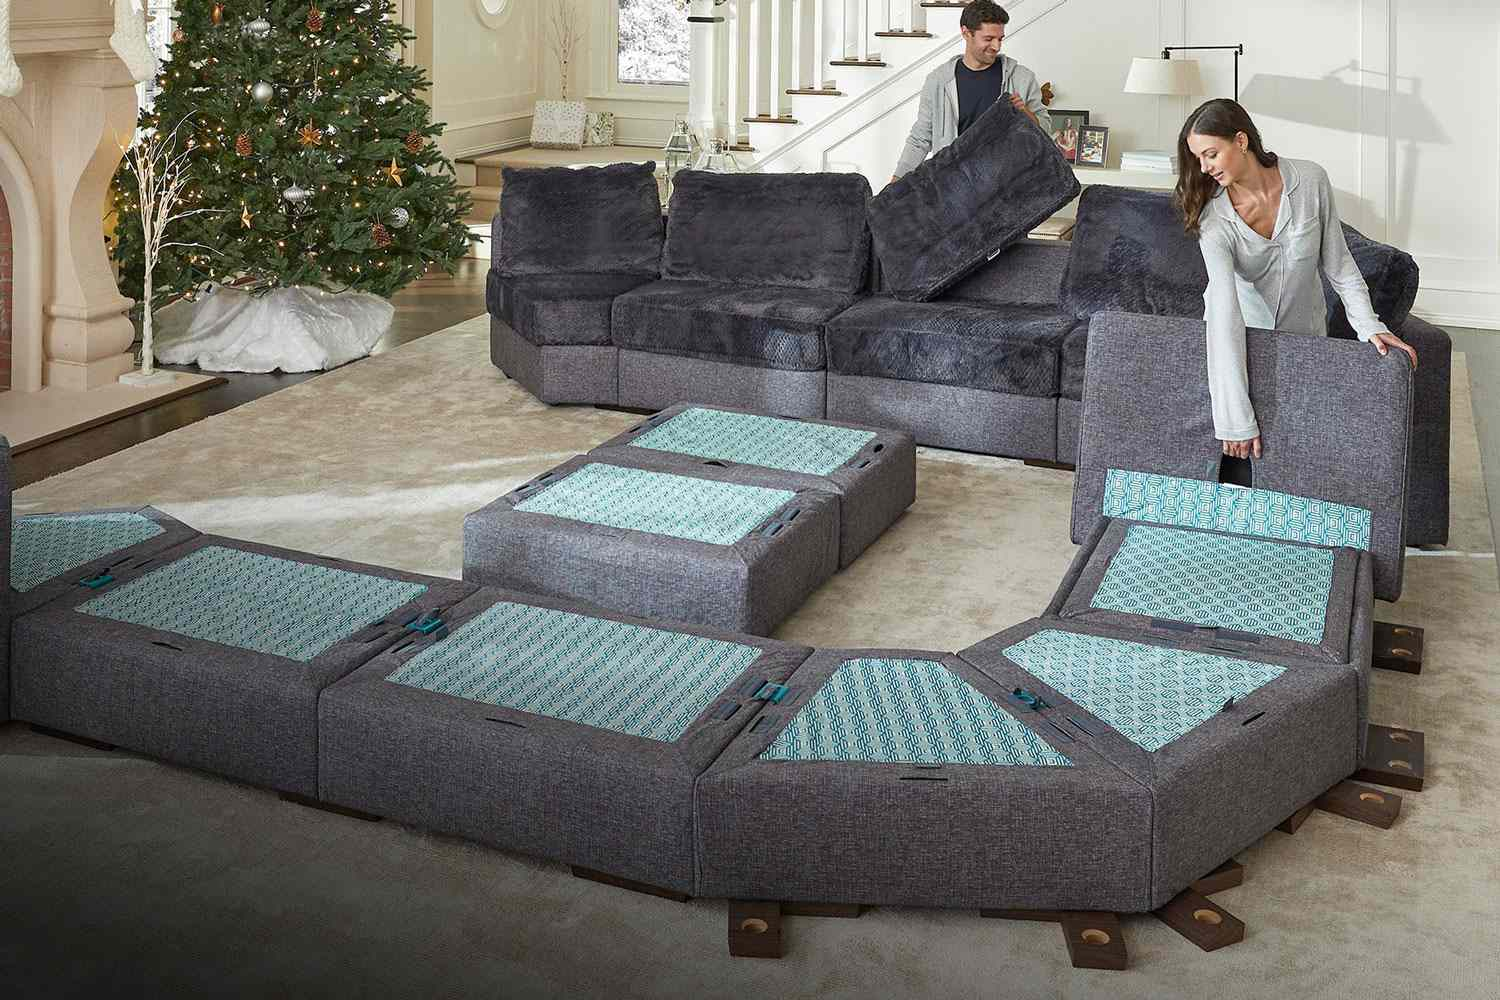 Lovesac sectional couches